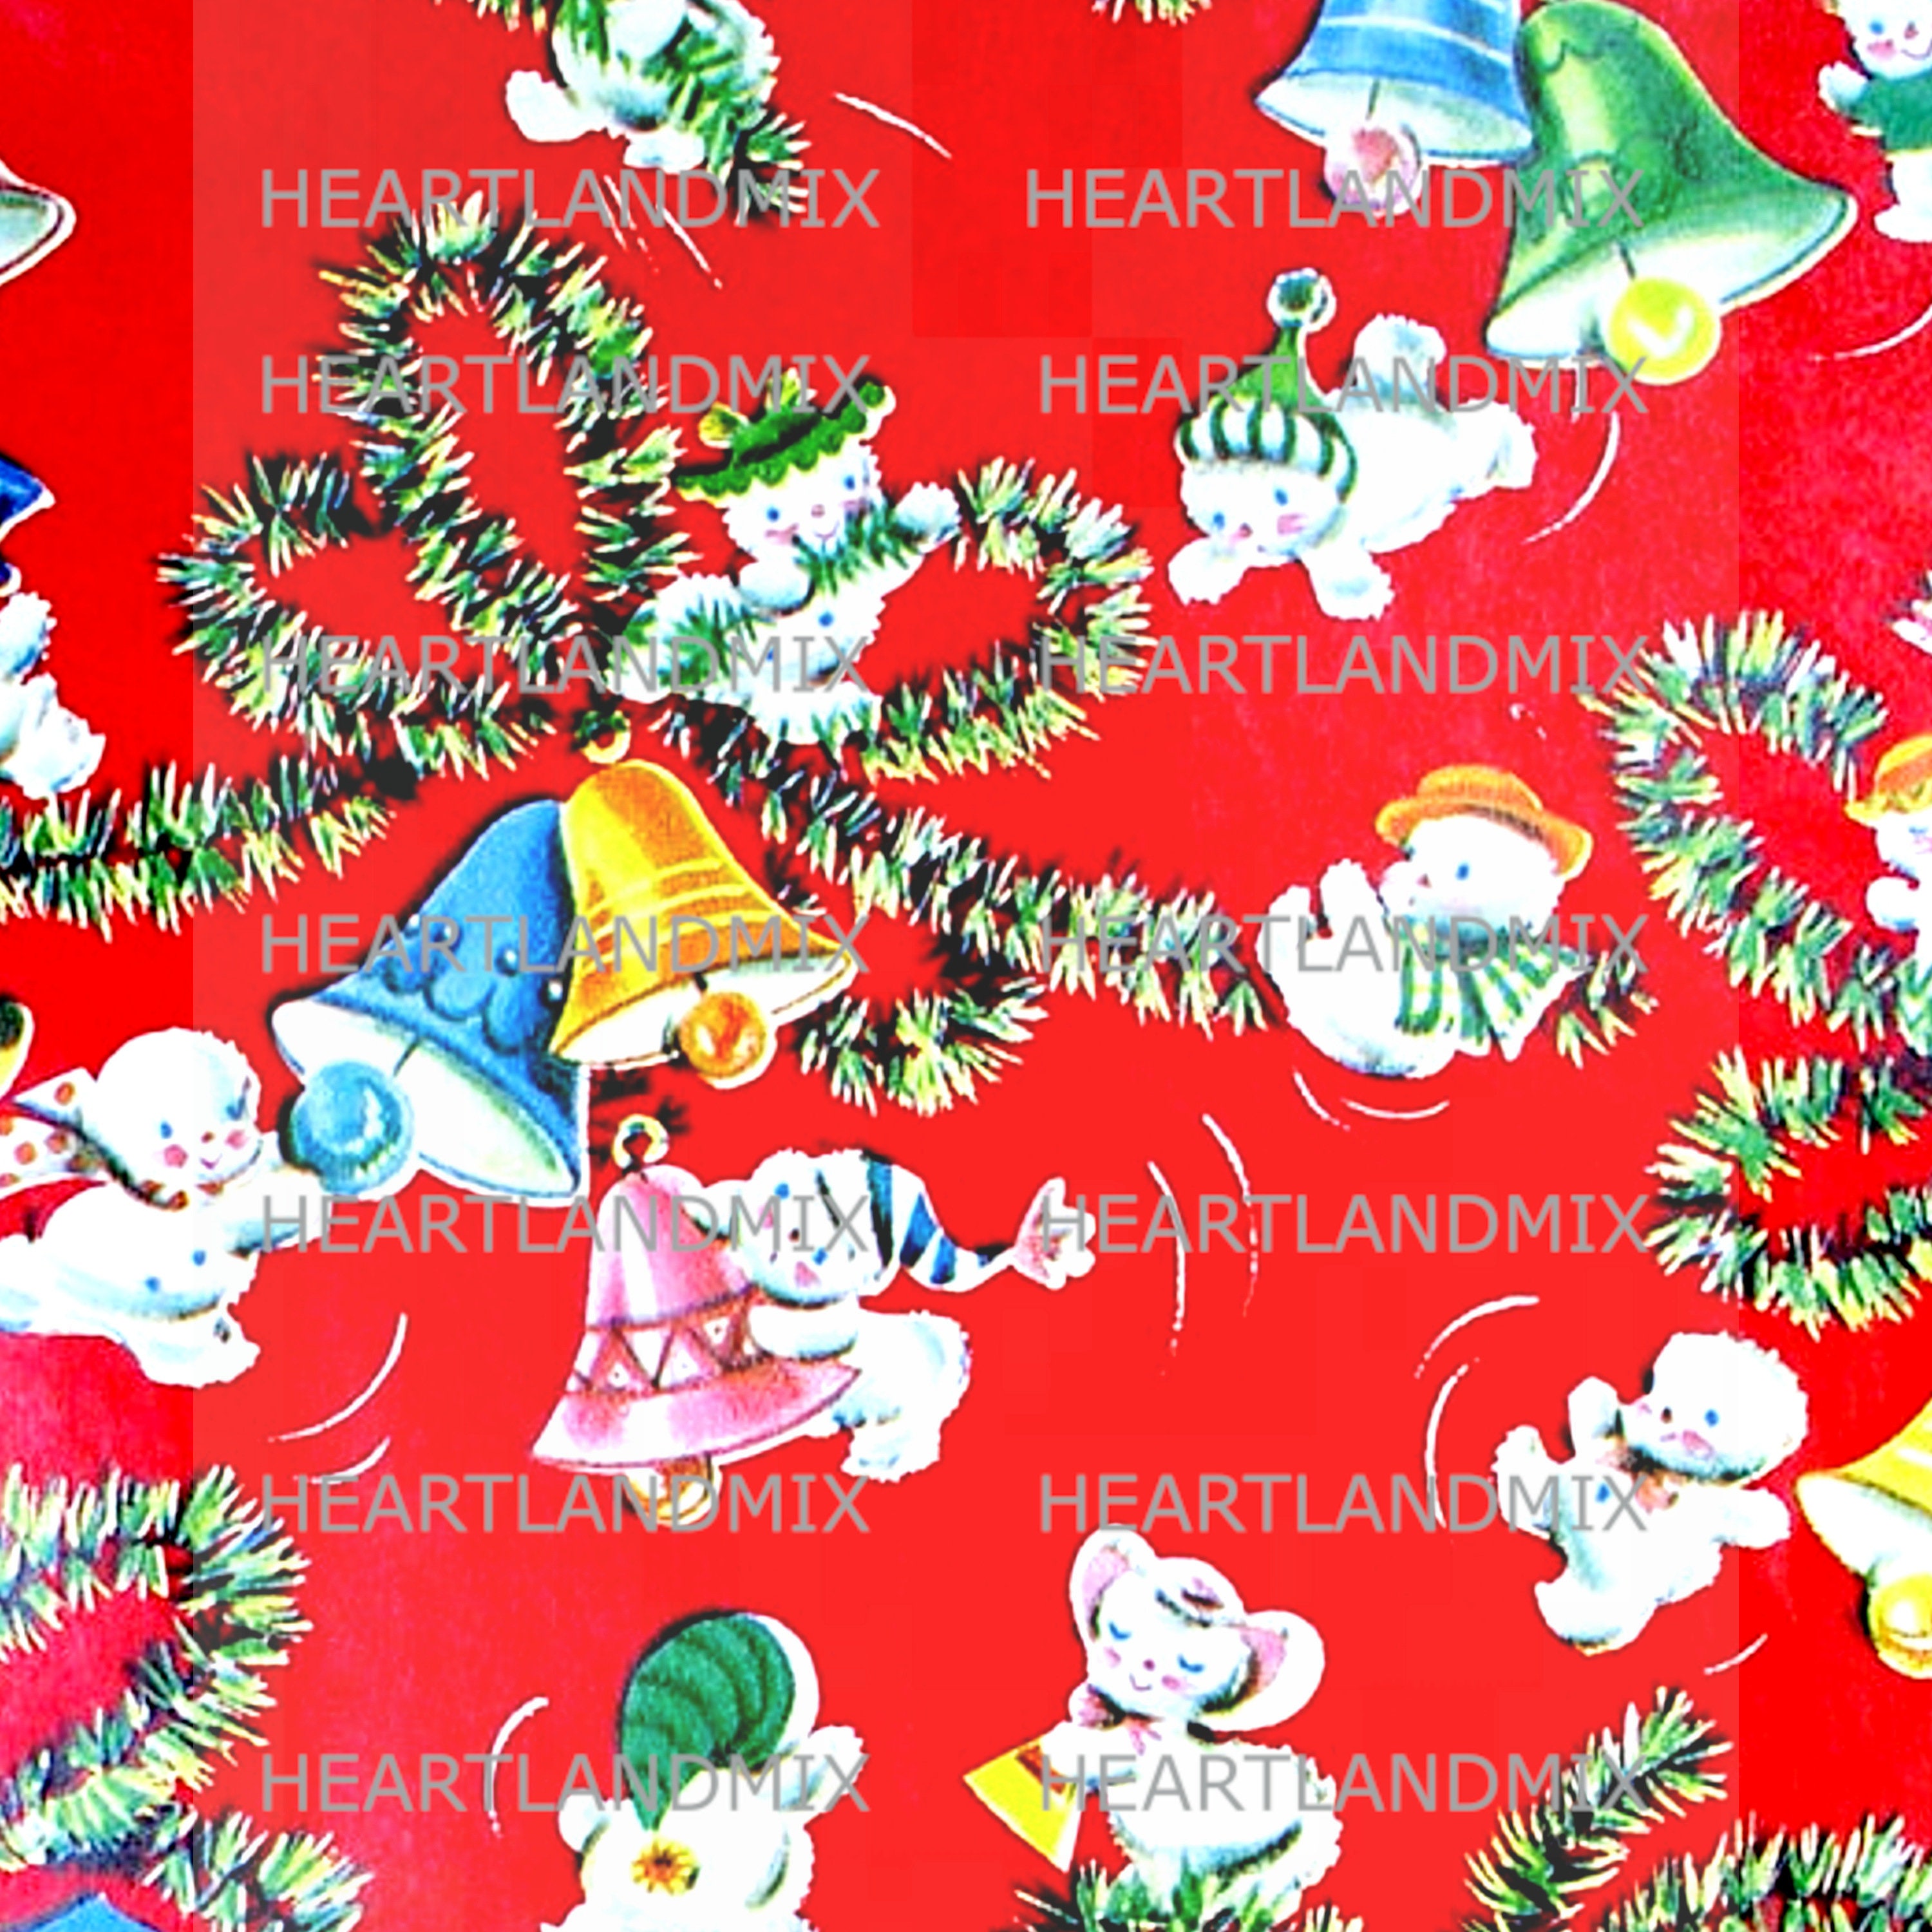 Retro Christmas Bells Wrapping Paper Wallpaper Download -  UK  Vintage  christmas wrapping paper, Vintage christmas images, Vintage christmas